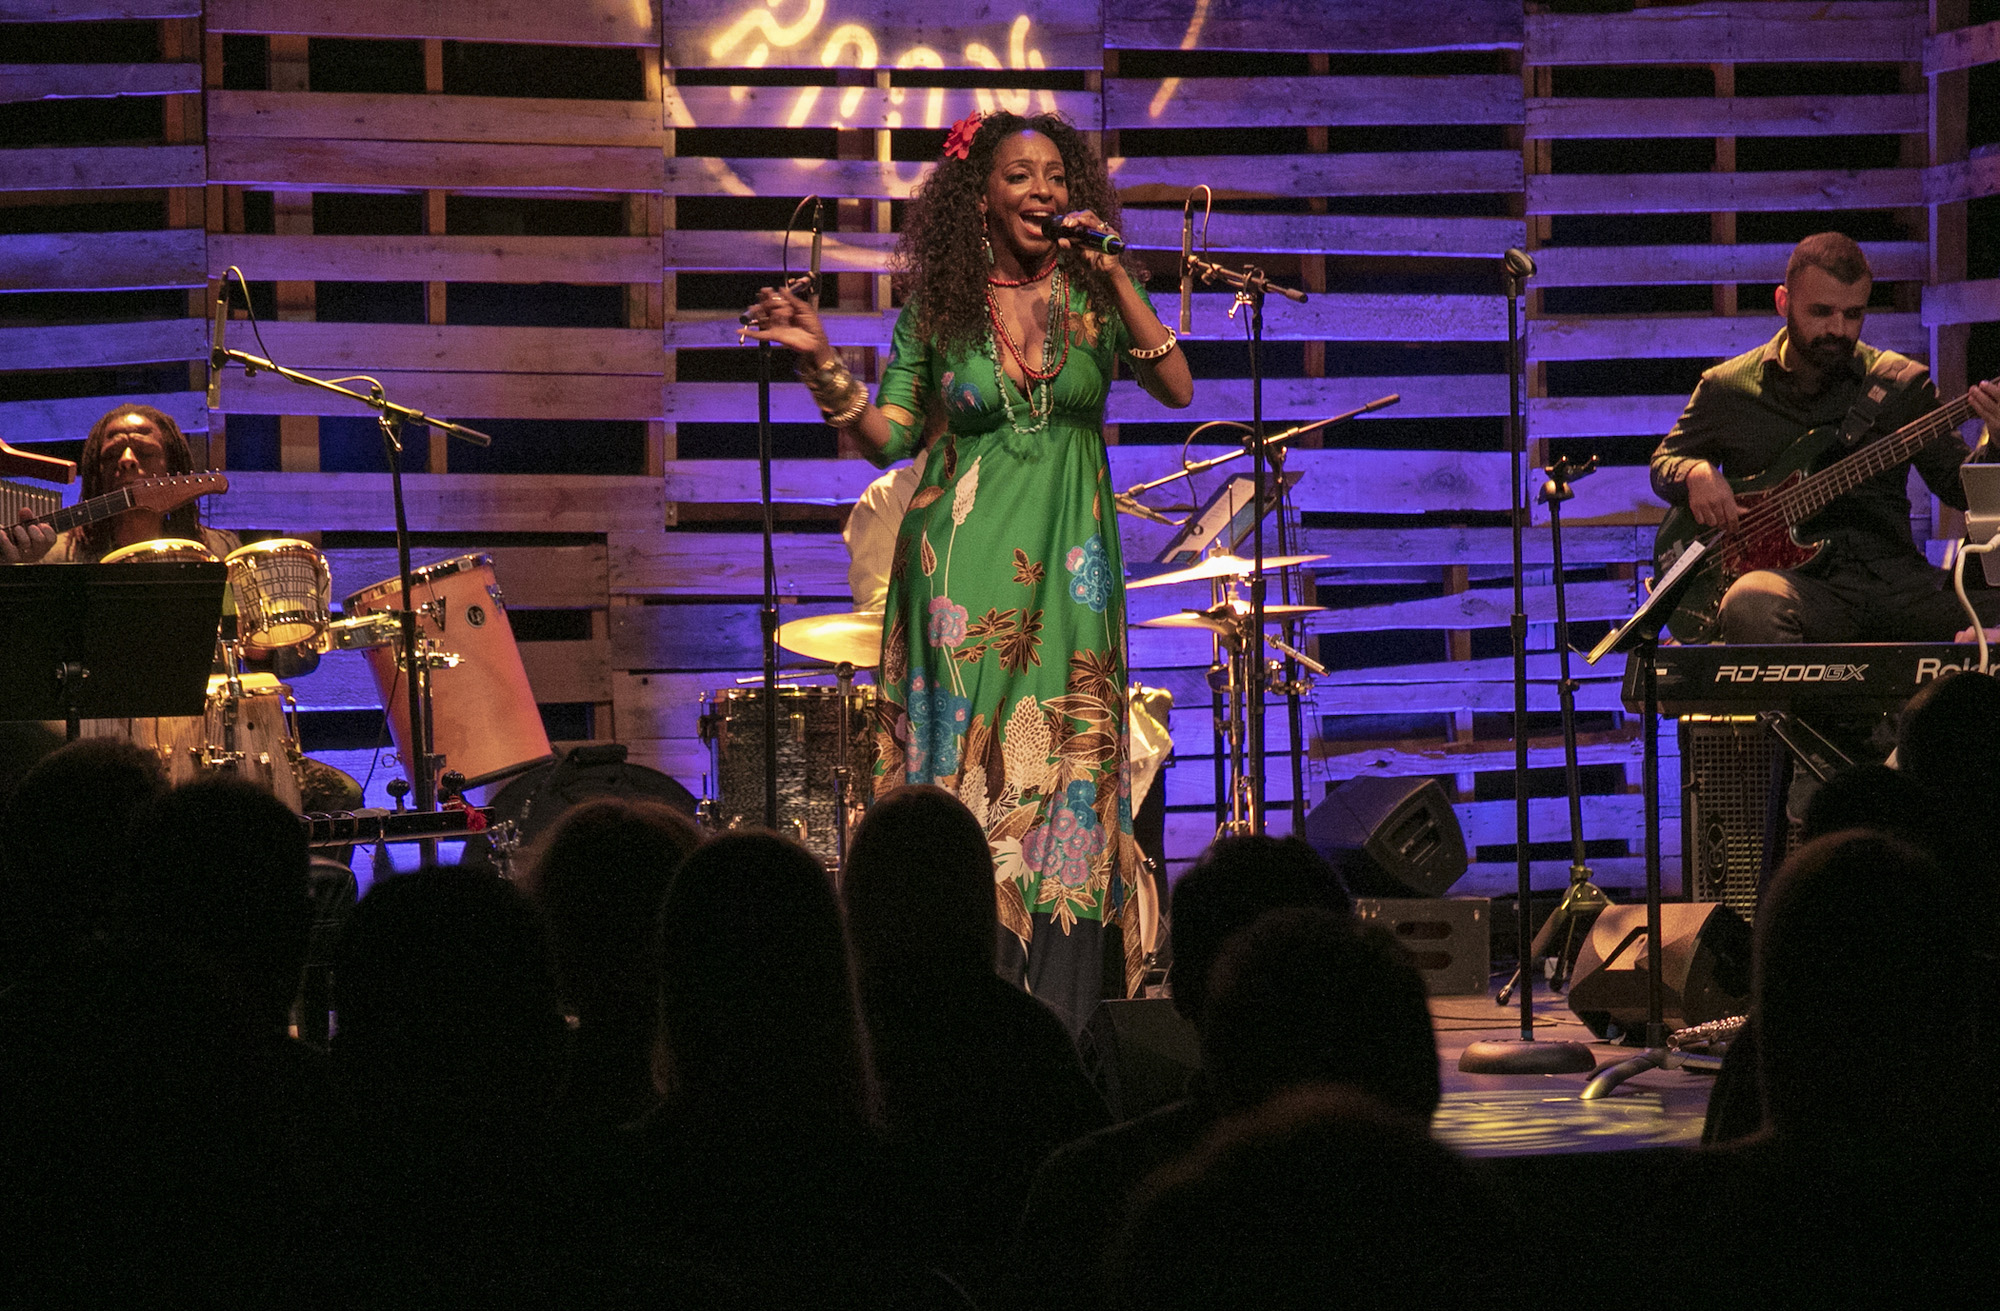 Kandace Lindsay was featured in An Evening of Eclectic Sounds with Kandace Lindsey as part of The Wallis’s Sorting Room on Friday, June 22, 2018.  PHOTO CREDIT: Lawrence K. Ho